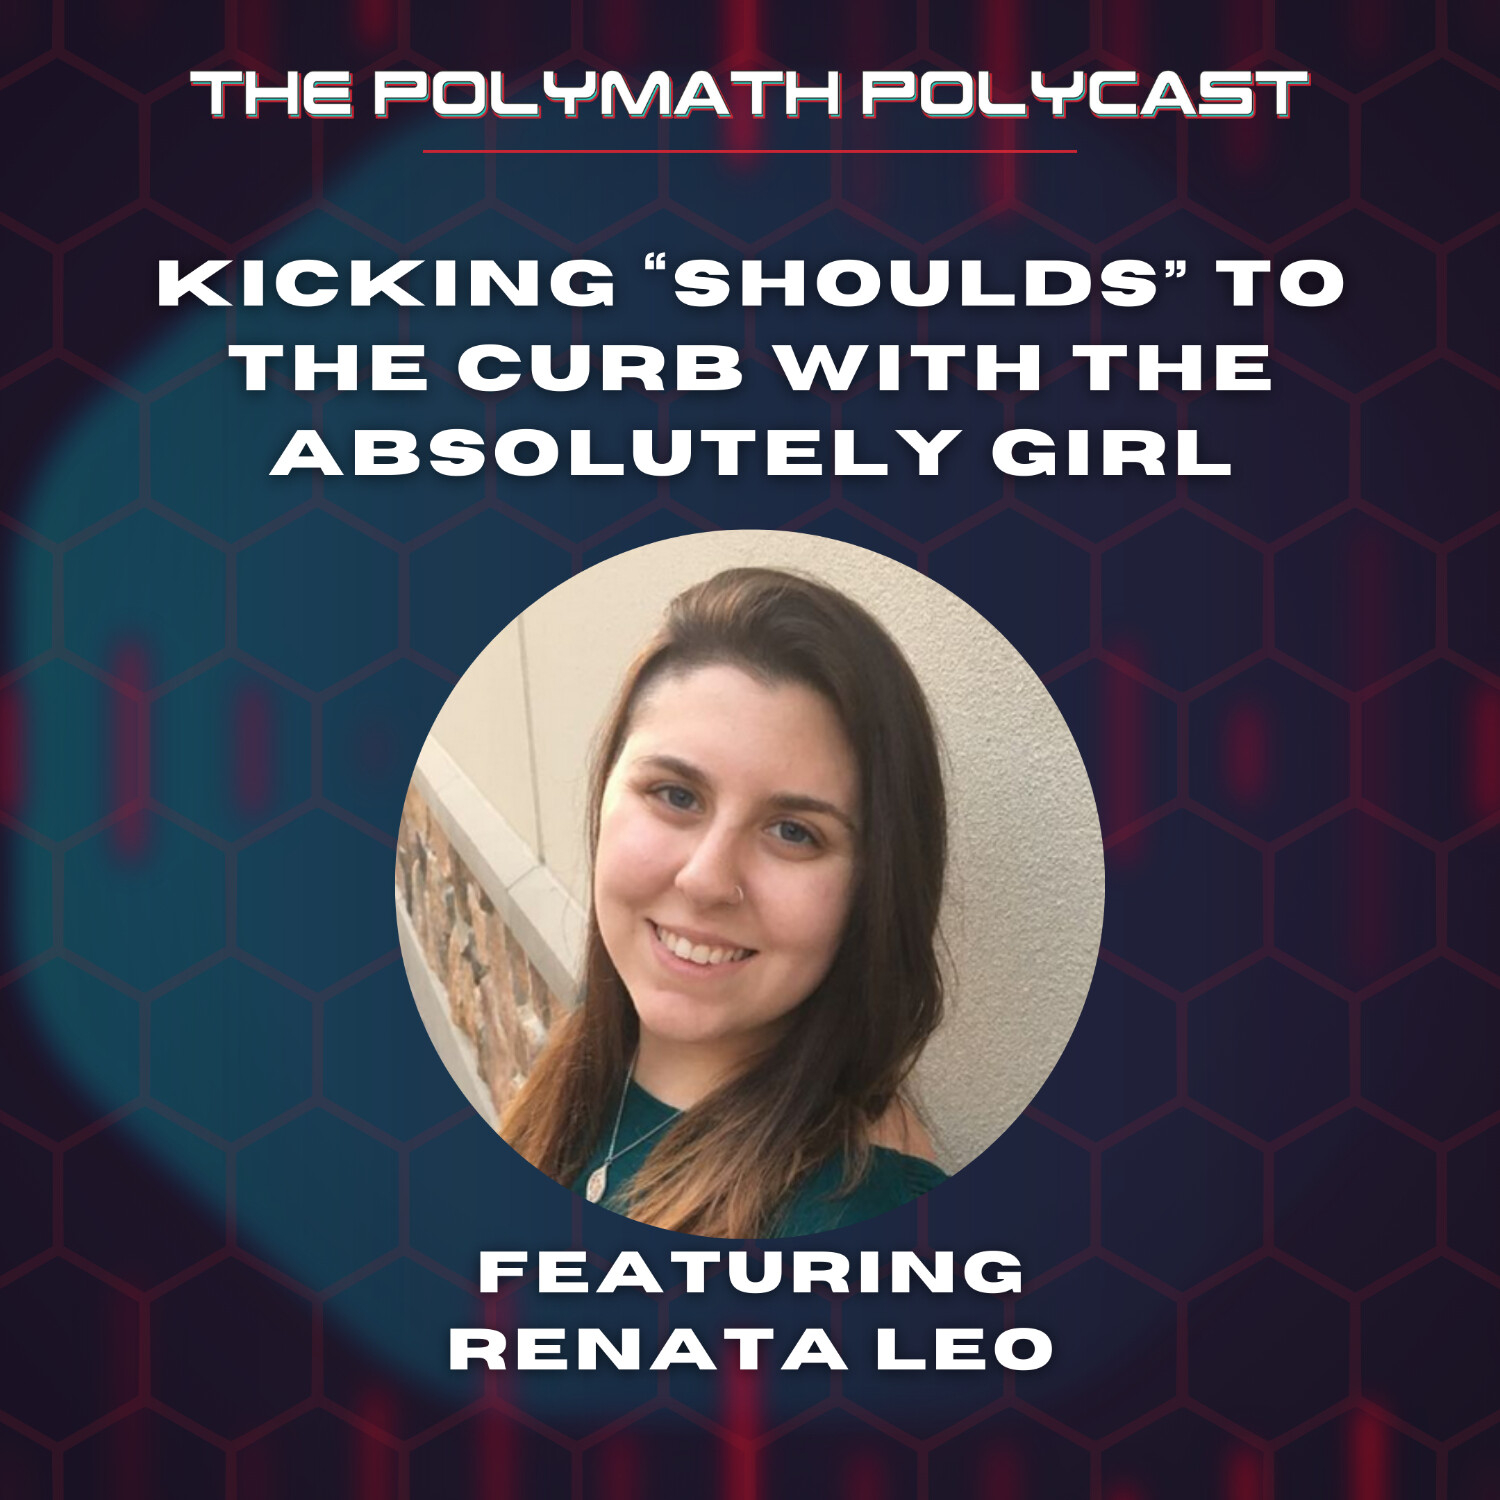 Kicking “Shoulds” to the Curb with The Startup Generalist Renata Leo #ThePolymathPolyCast